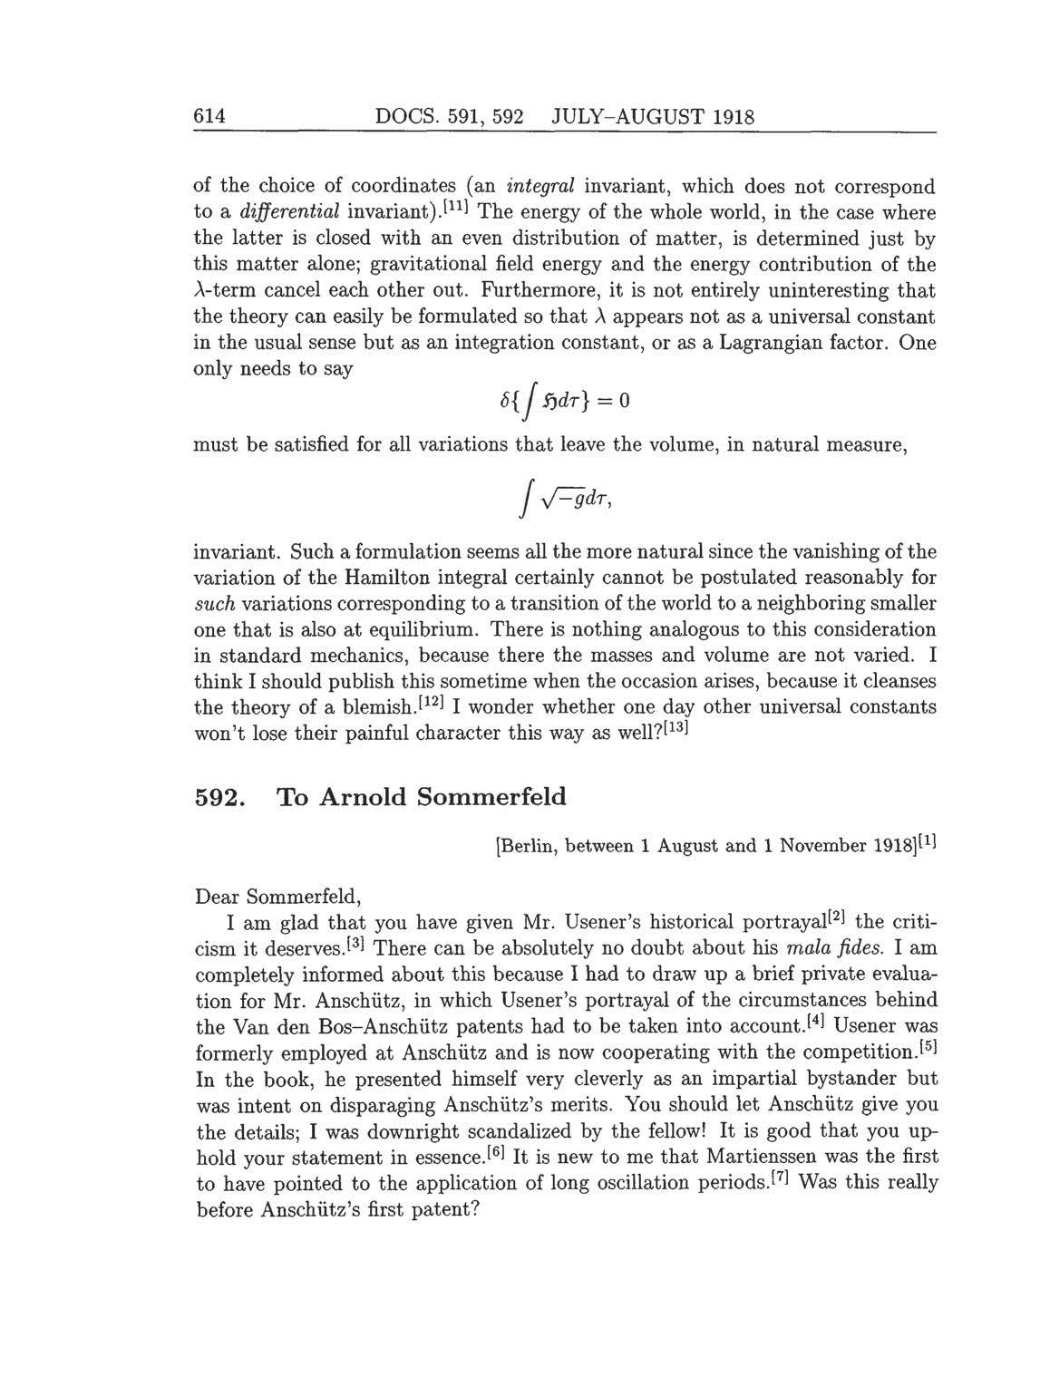 Volume 8: The Berlin Years: Correspondence, 1914-1918 (English translation supplement) page 614